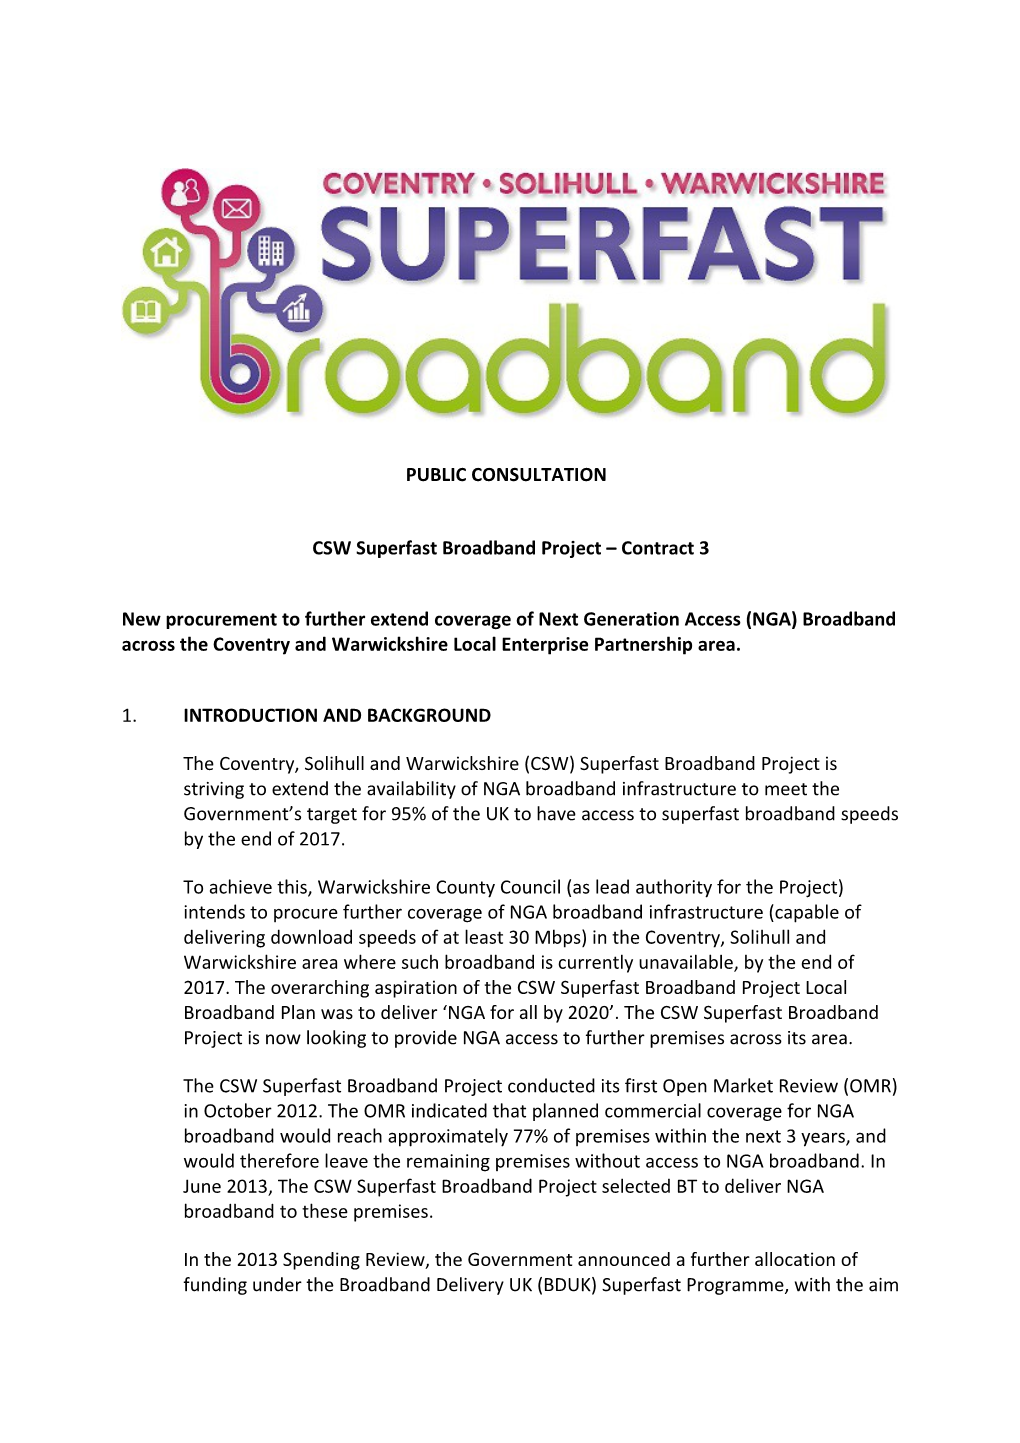 CSW Superfast Broadband Project Contract 3